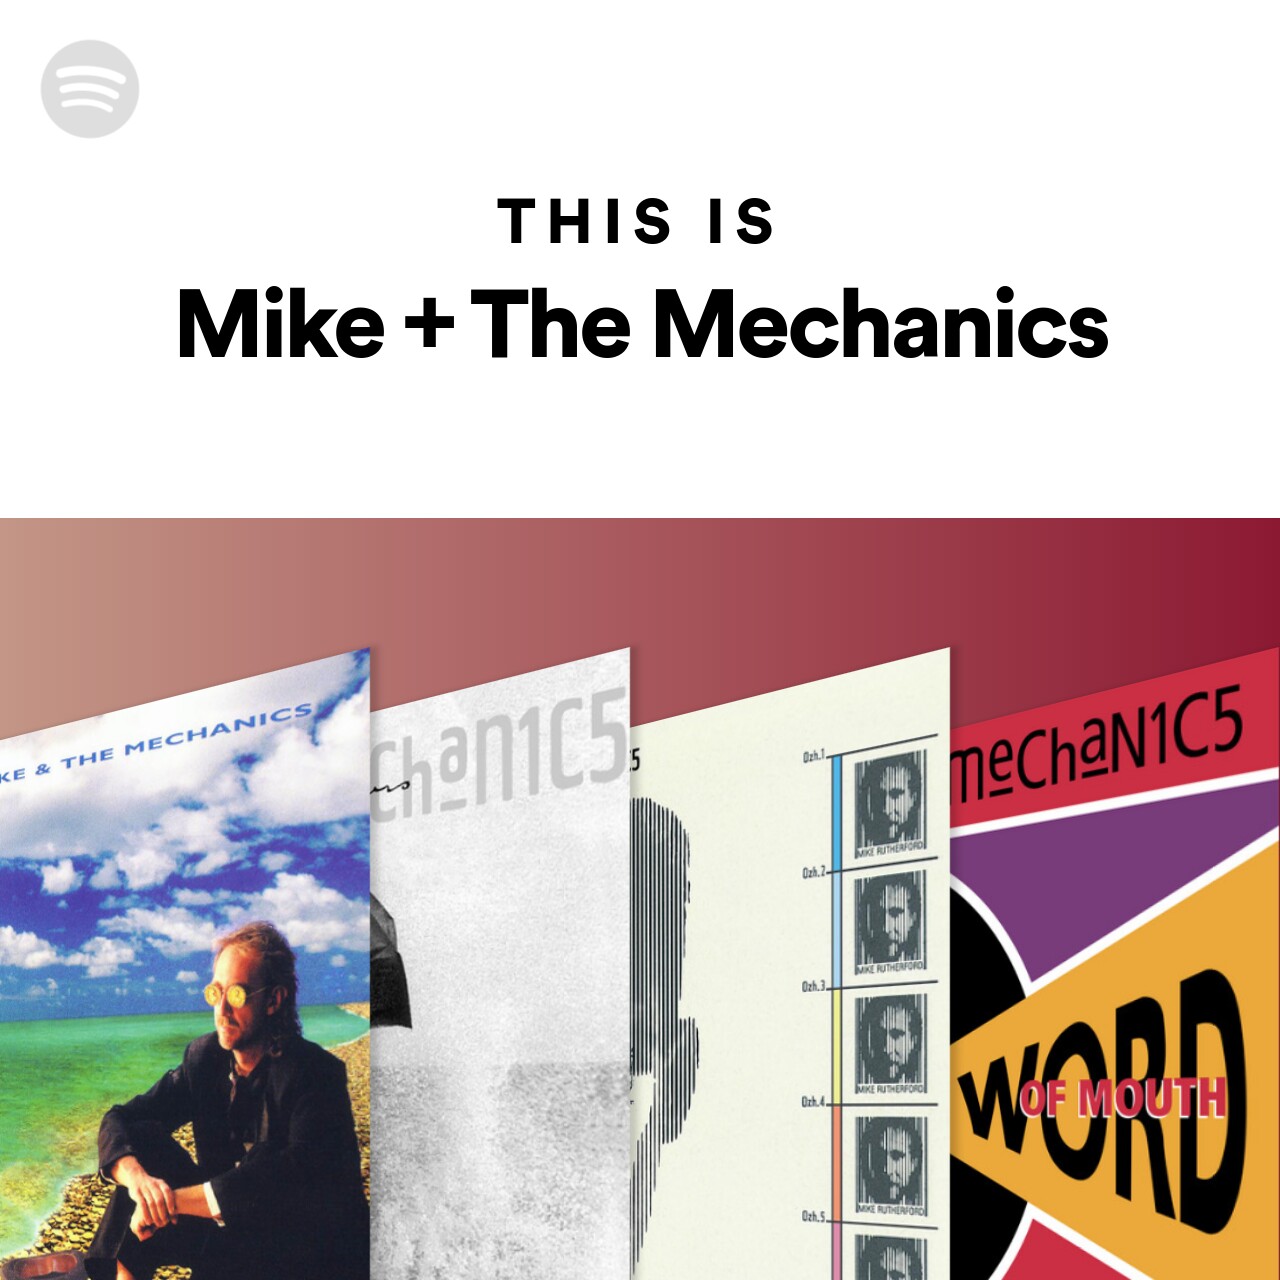 This Is Mike + The Mechanics